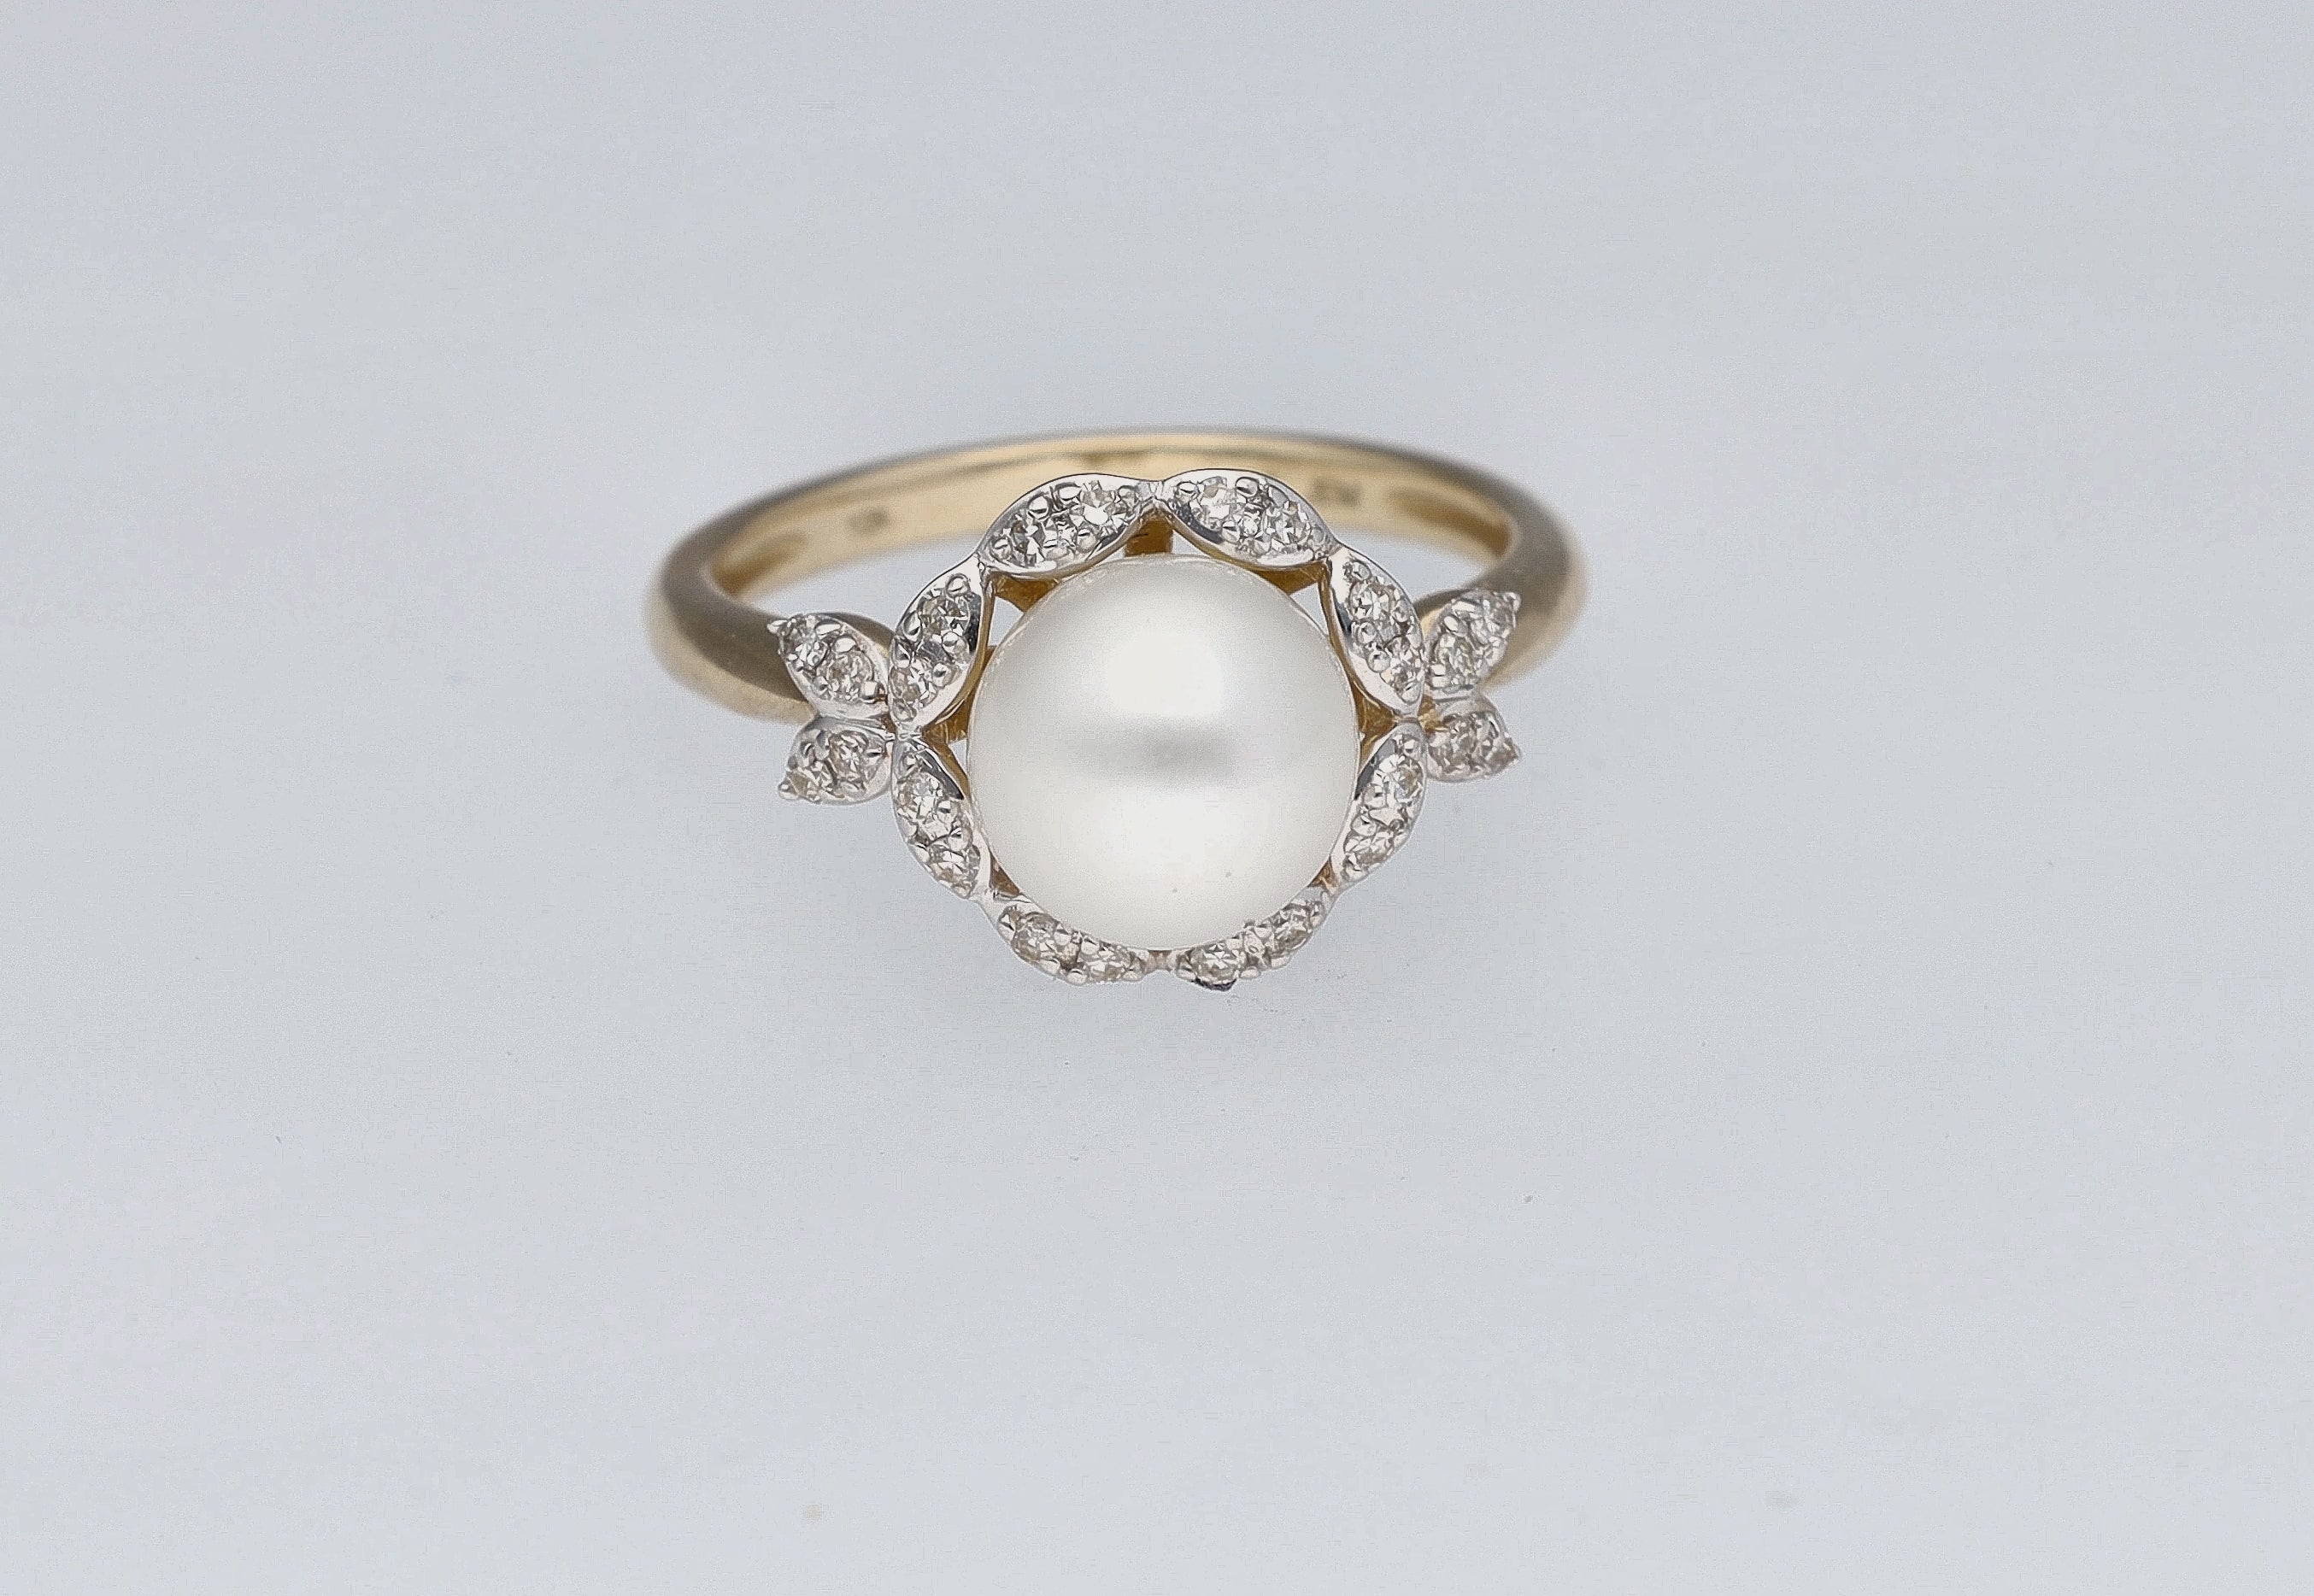 10K Yellow Gold Cultured Pearl and Diamond Fashion Ring